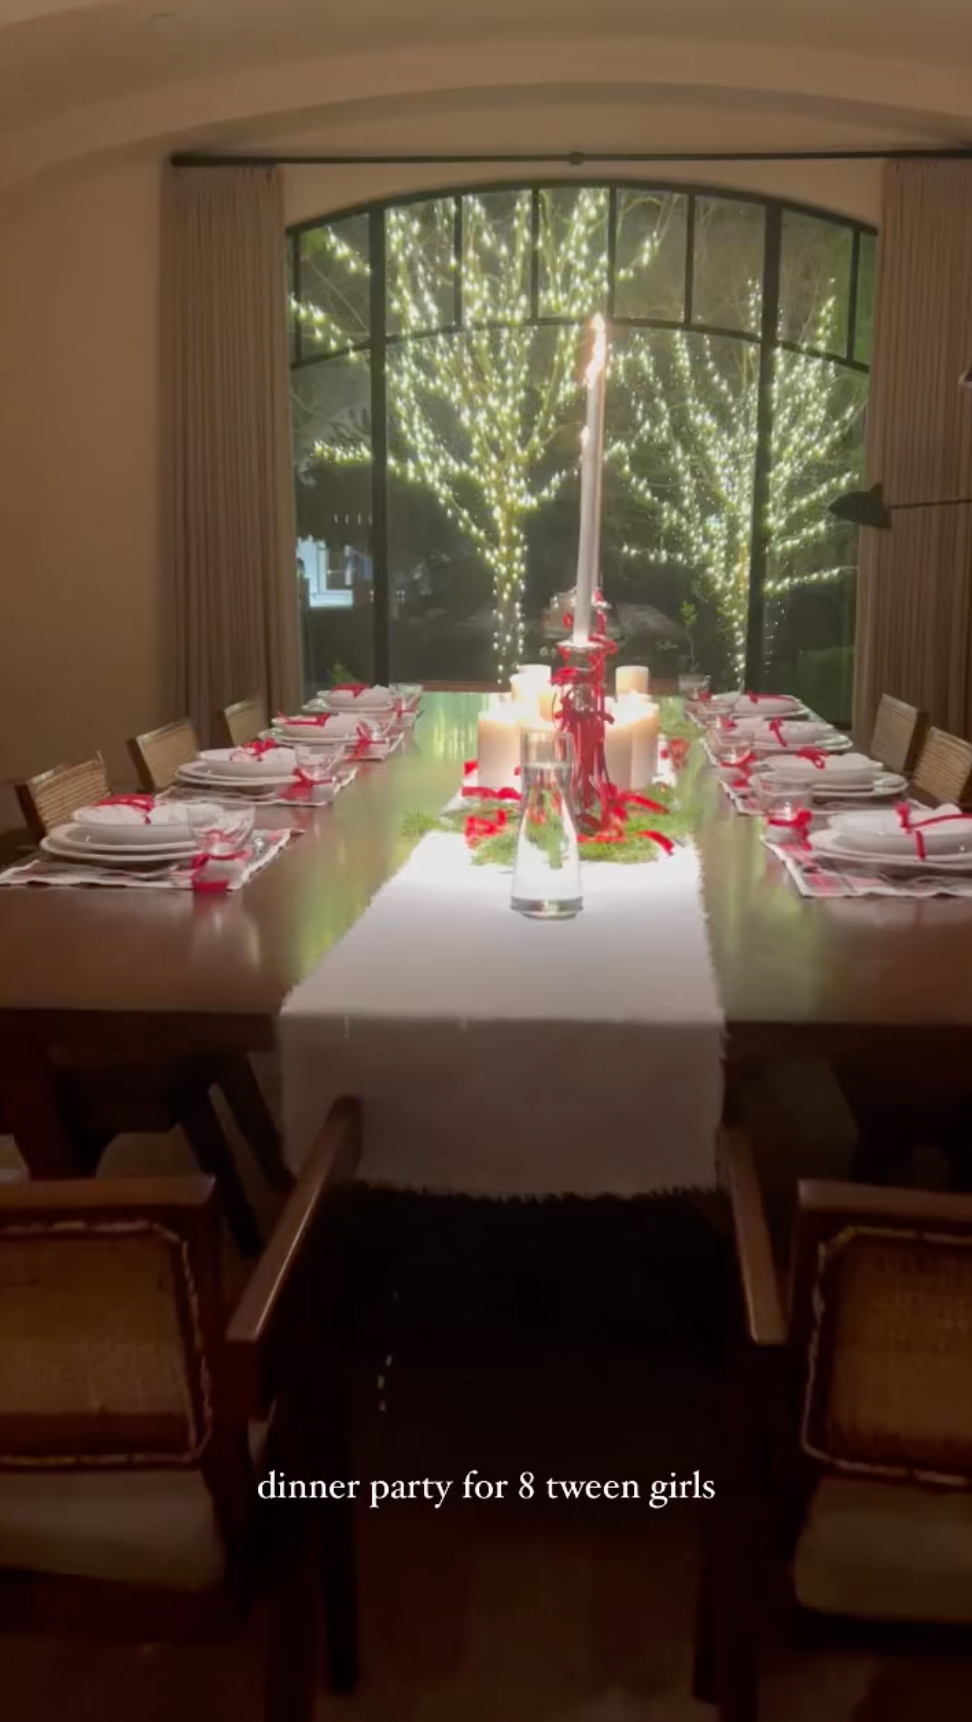 She also hosted a festive dinner for her daughter Penelope and her friends